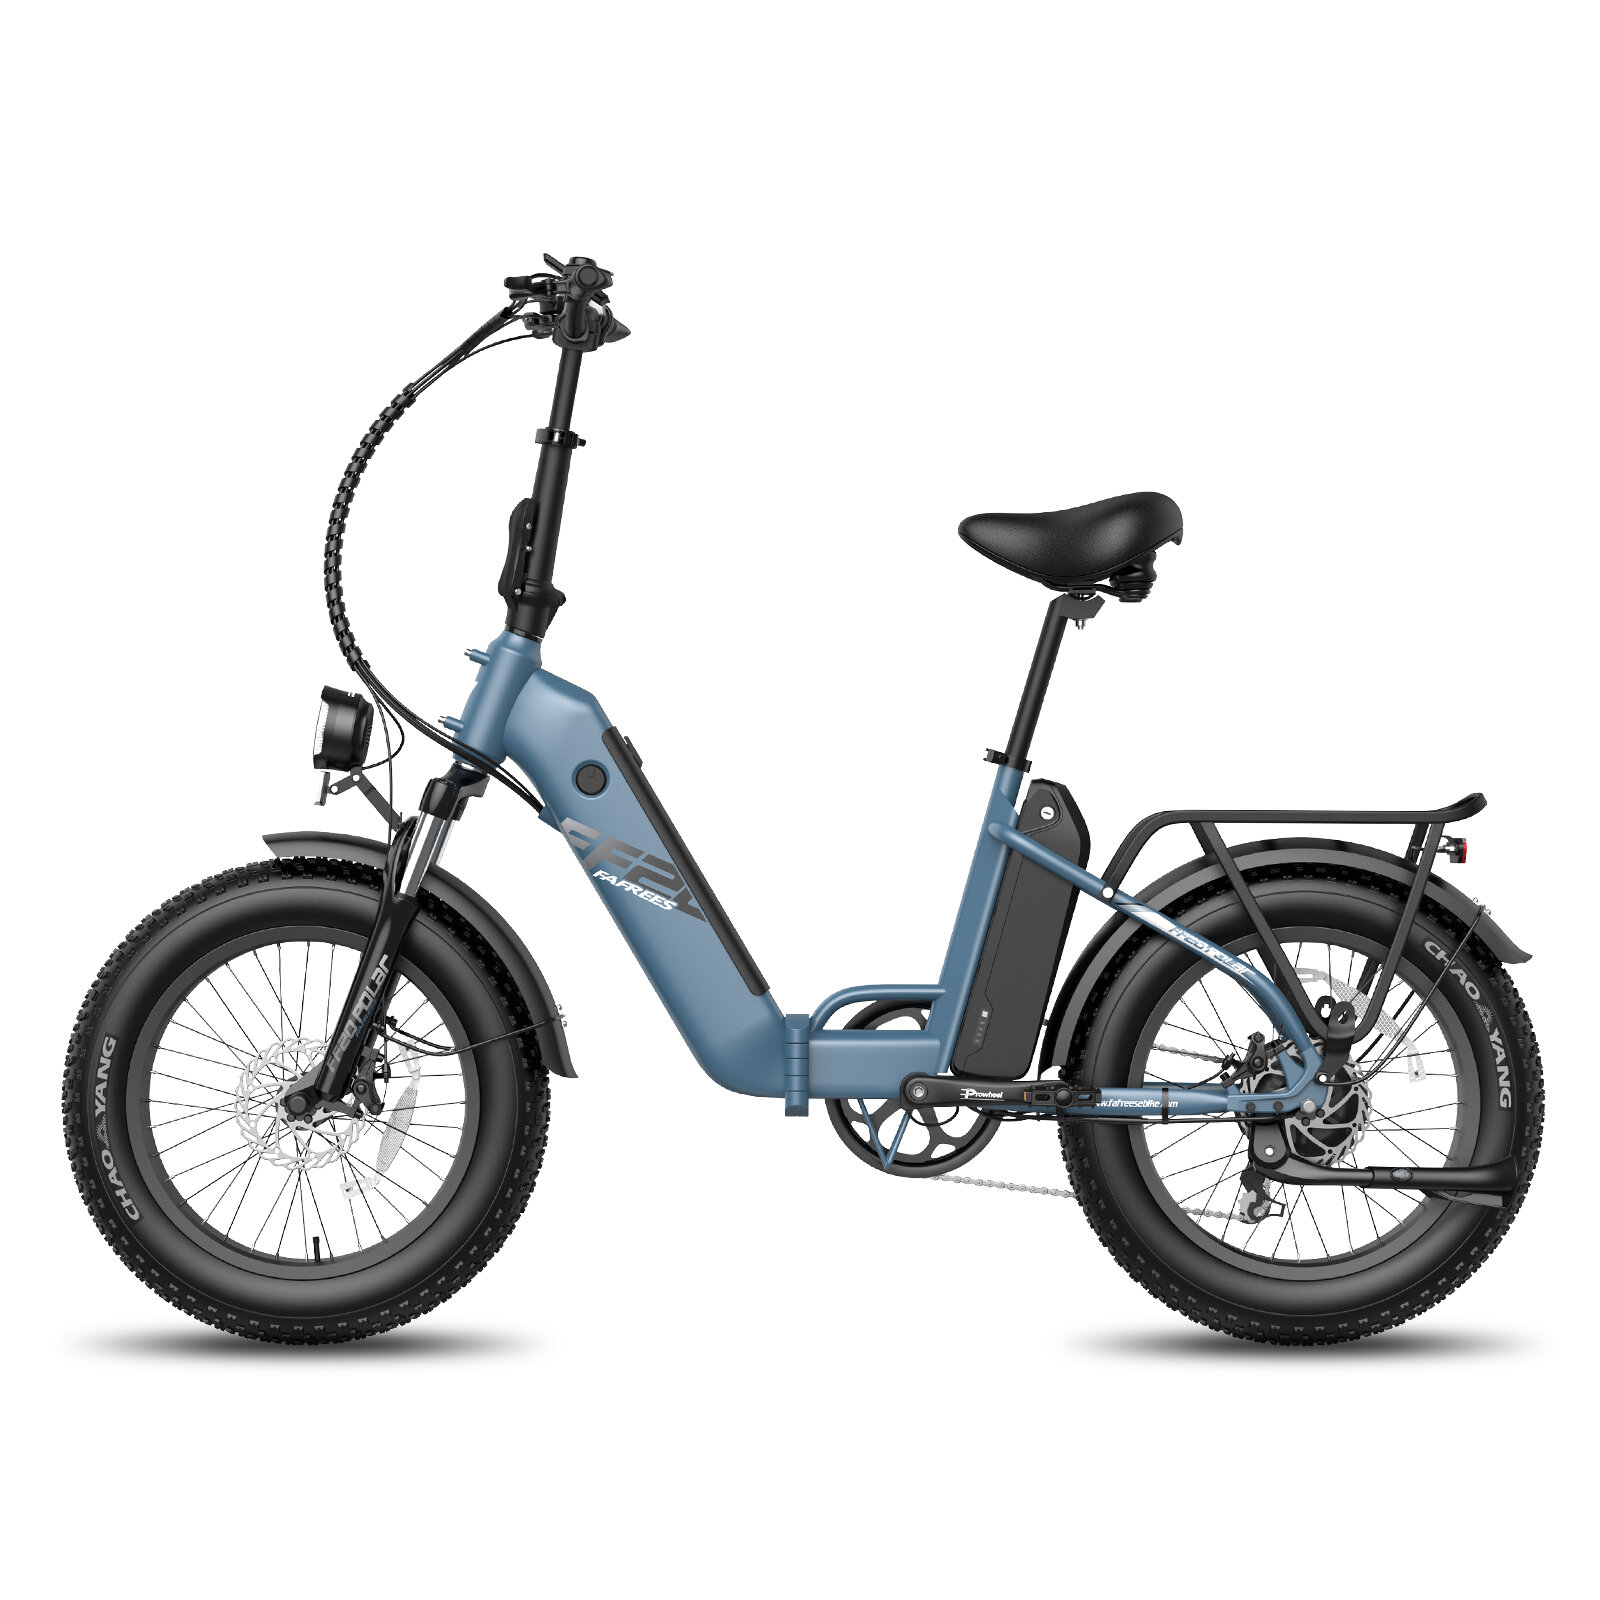 best price,fafrees,ff20,polar,500w,48v,10.4ahx2,electric,bicycle,eu,discount